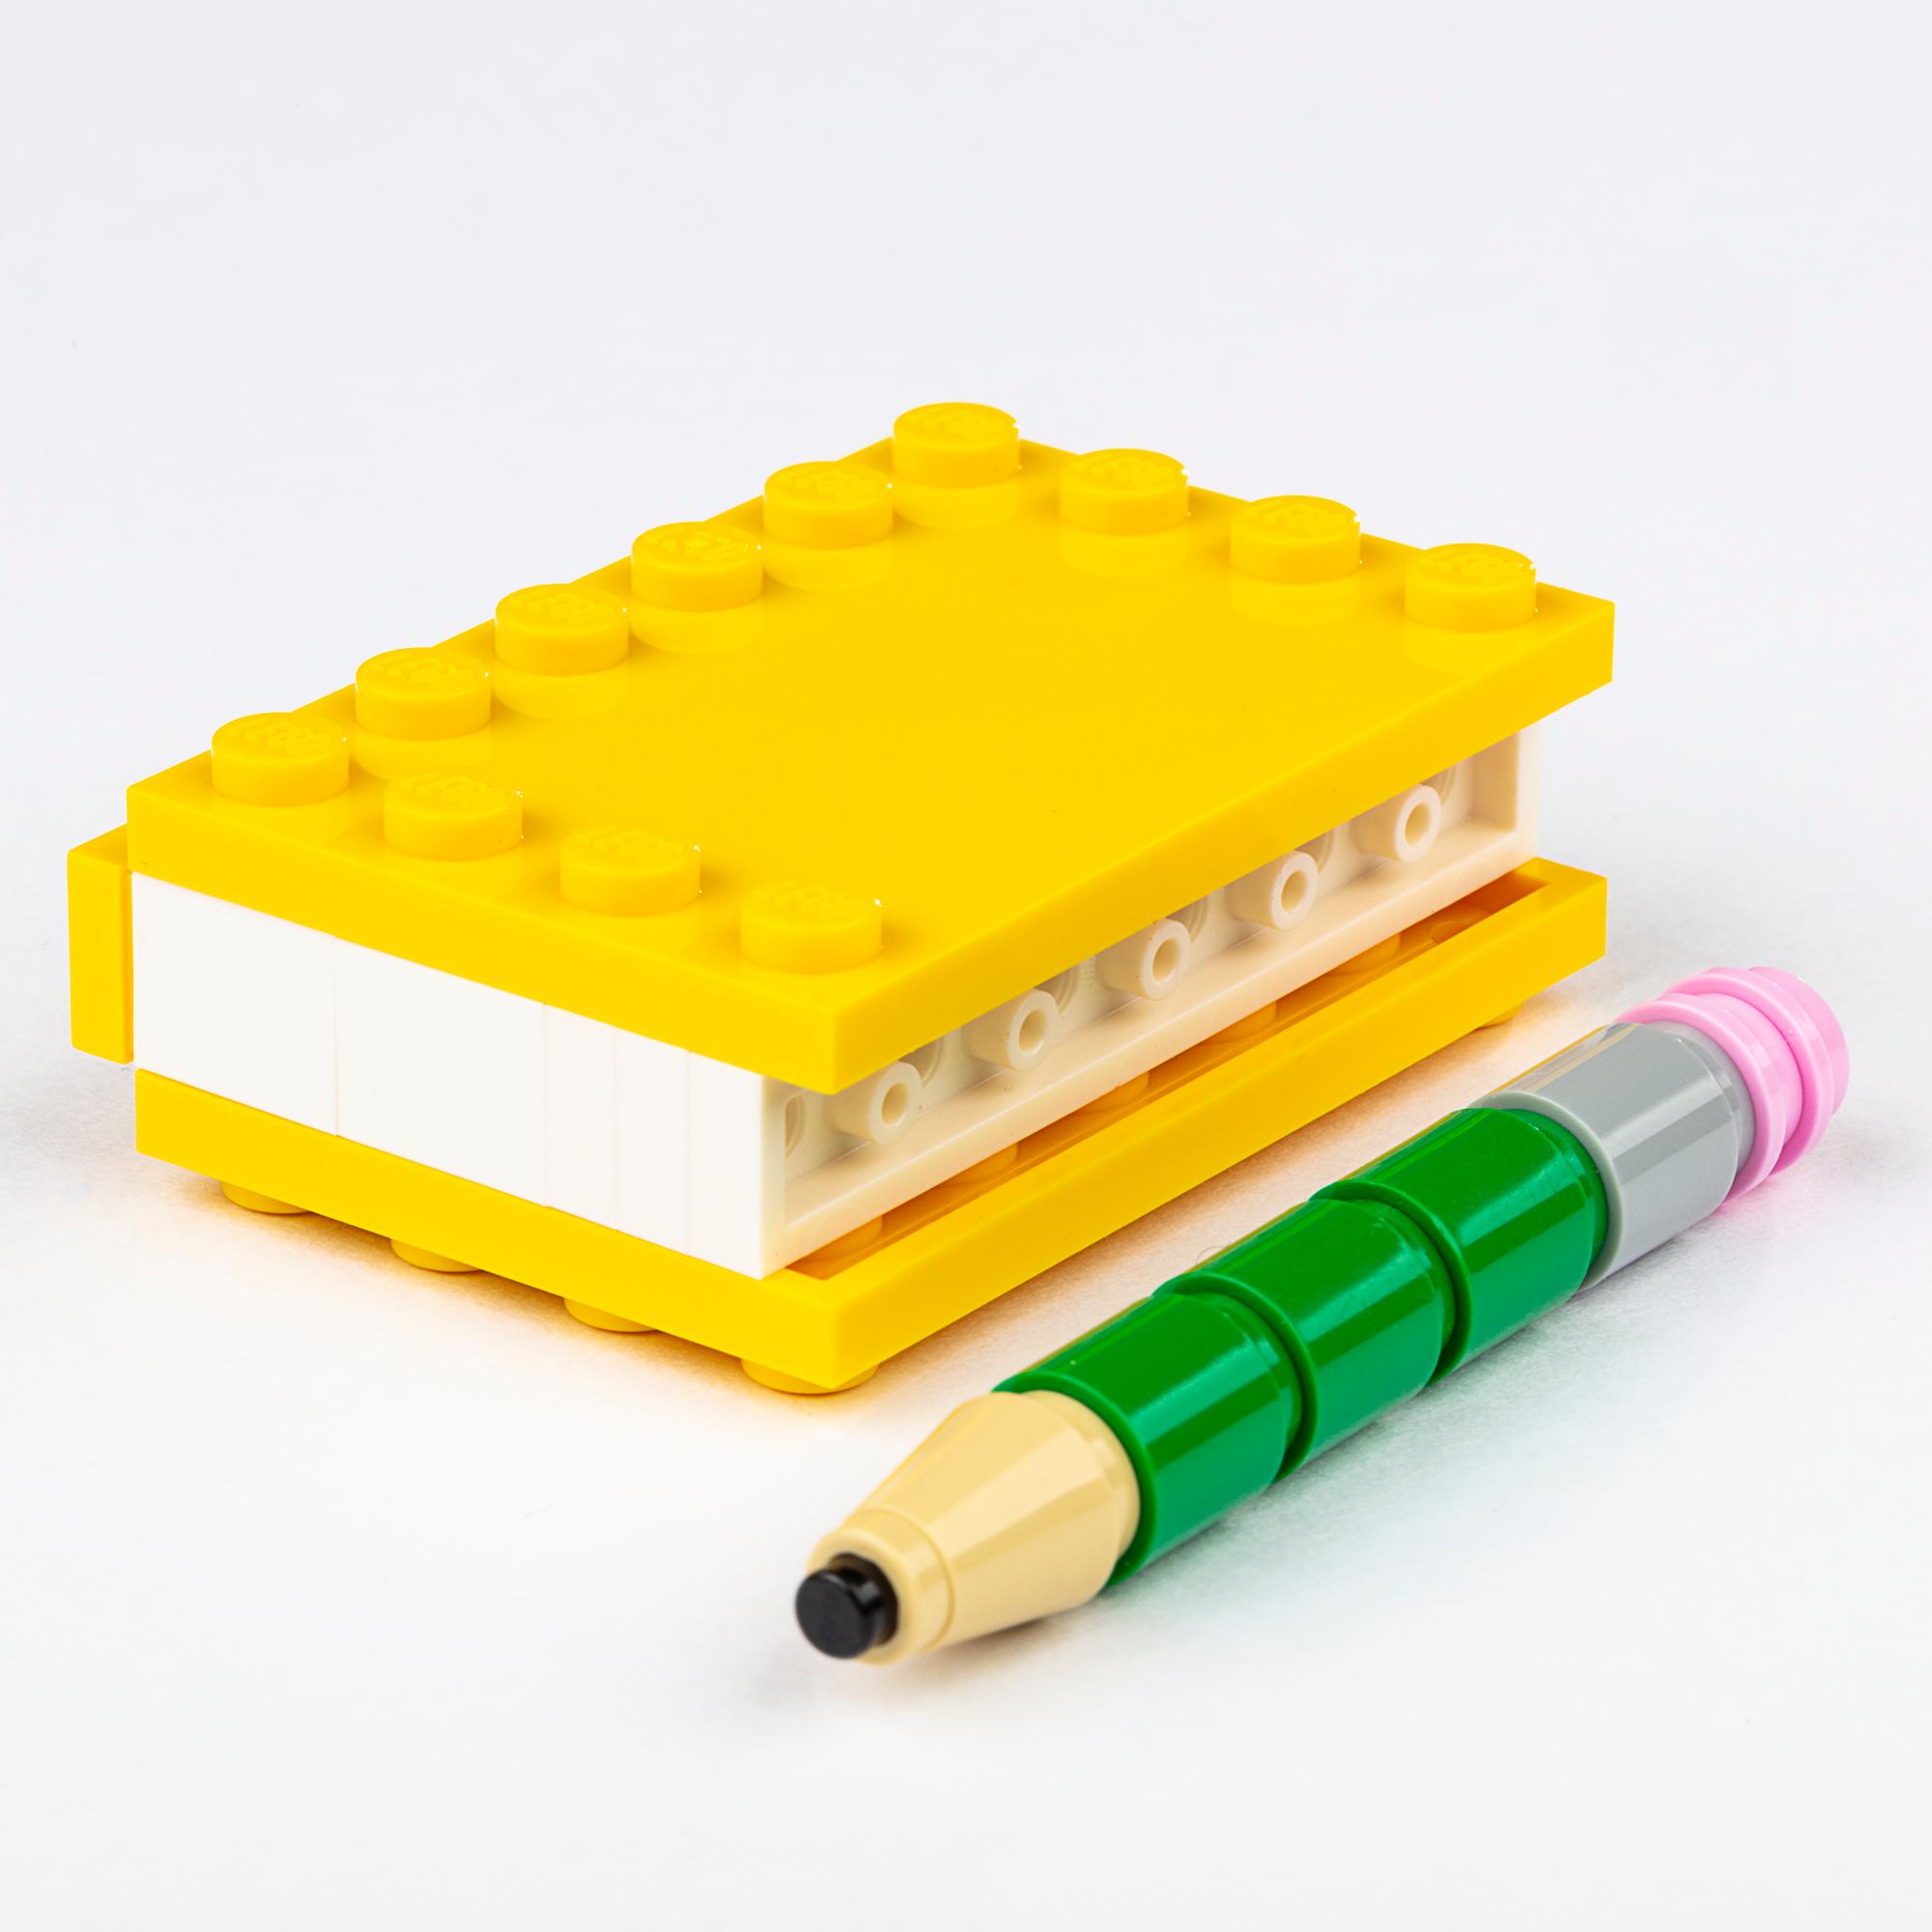 skibsbygning heldig Kan beregnes LEGO on Twitter: "Small book, giant stories. Learn how to build a mini book  &amp; pencil to create a new story! #LEGOMastersFOX #BuildLikeAMaster  https://t.co/KnZFCh2Rx5" / Twitter